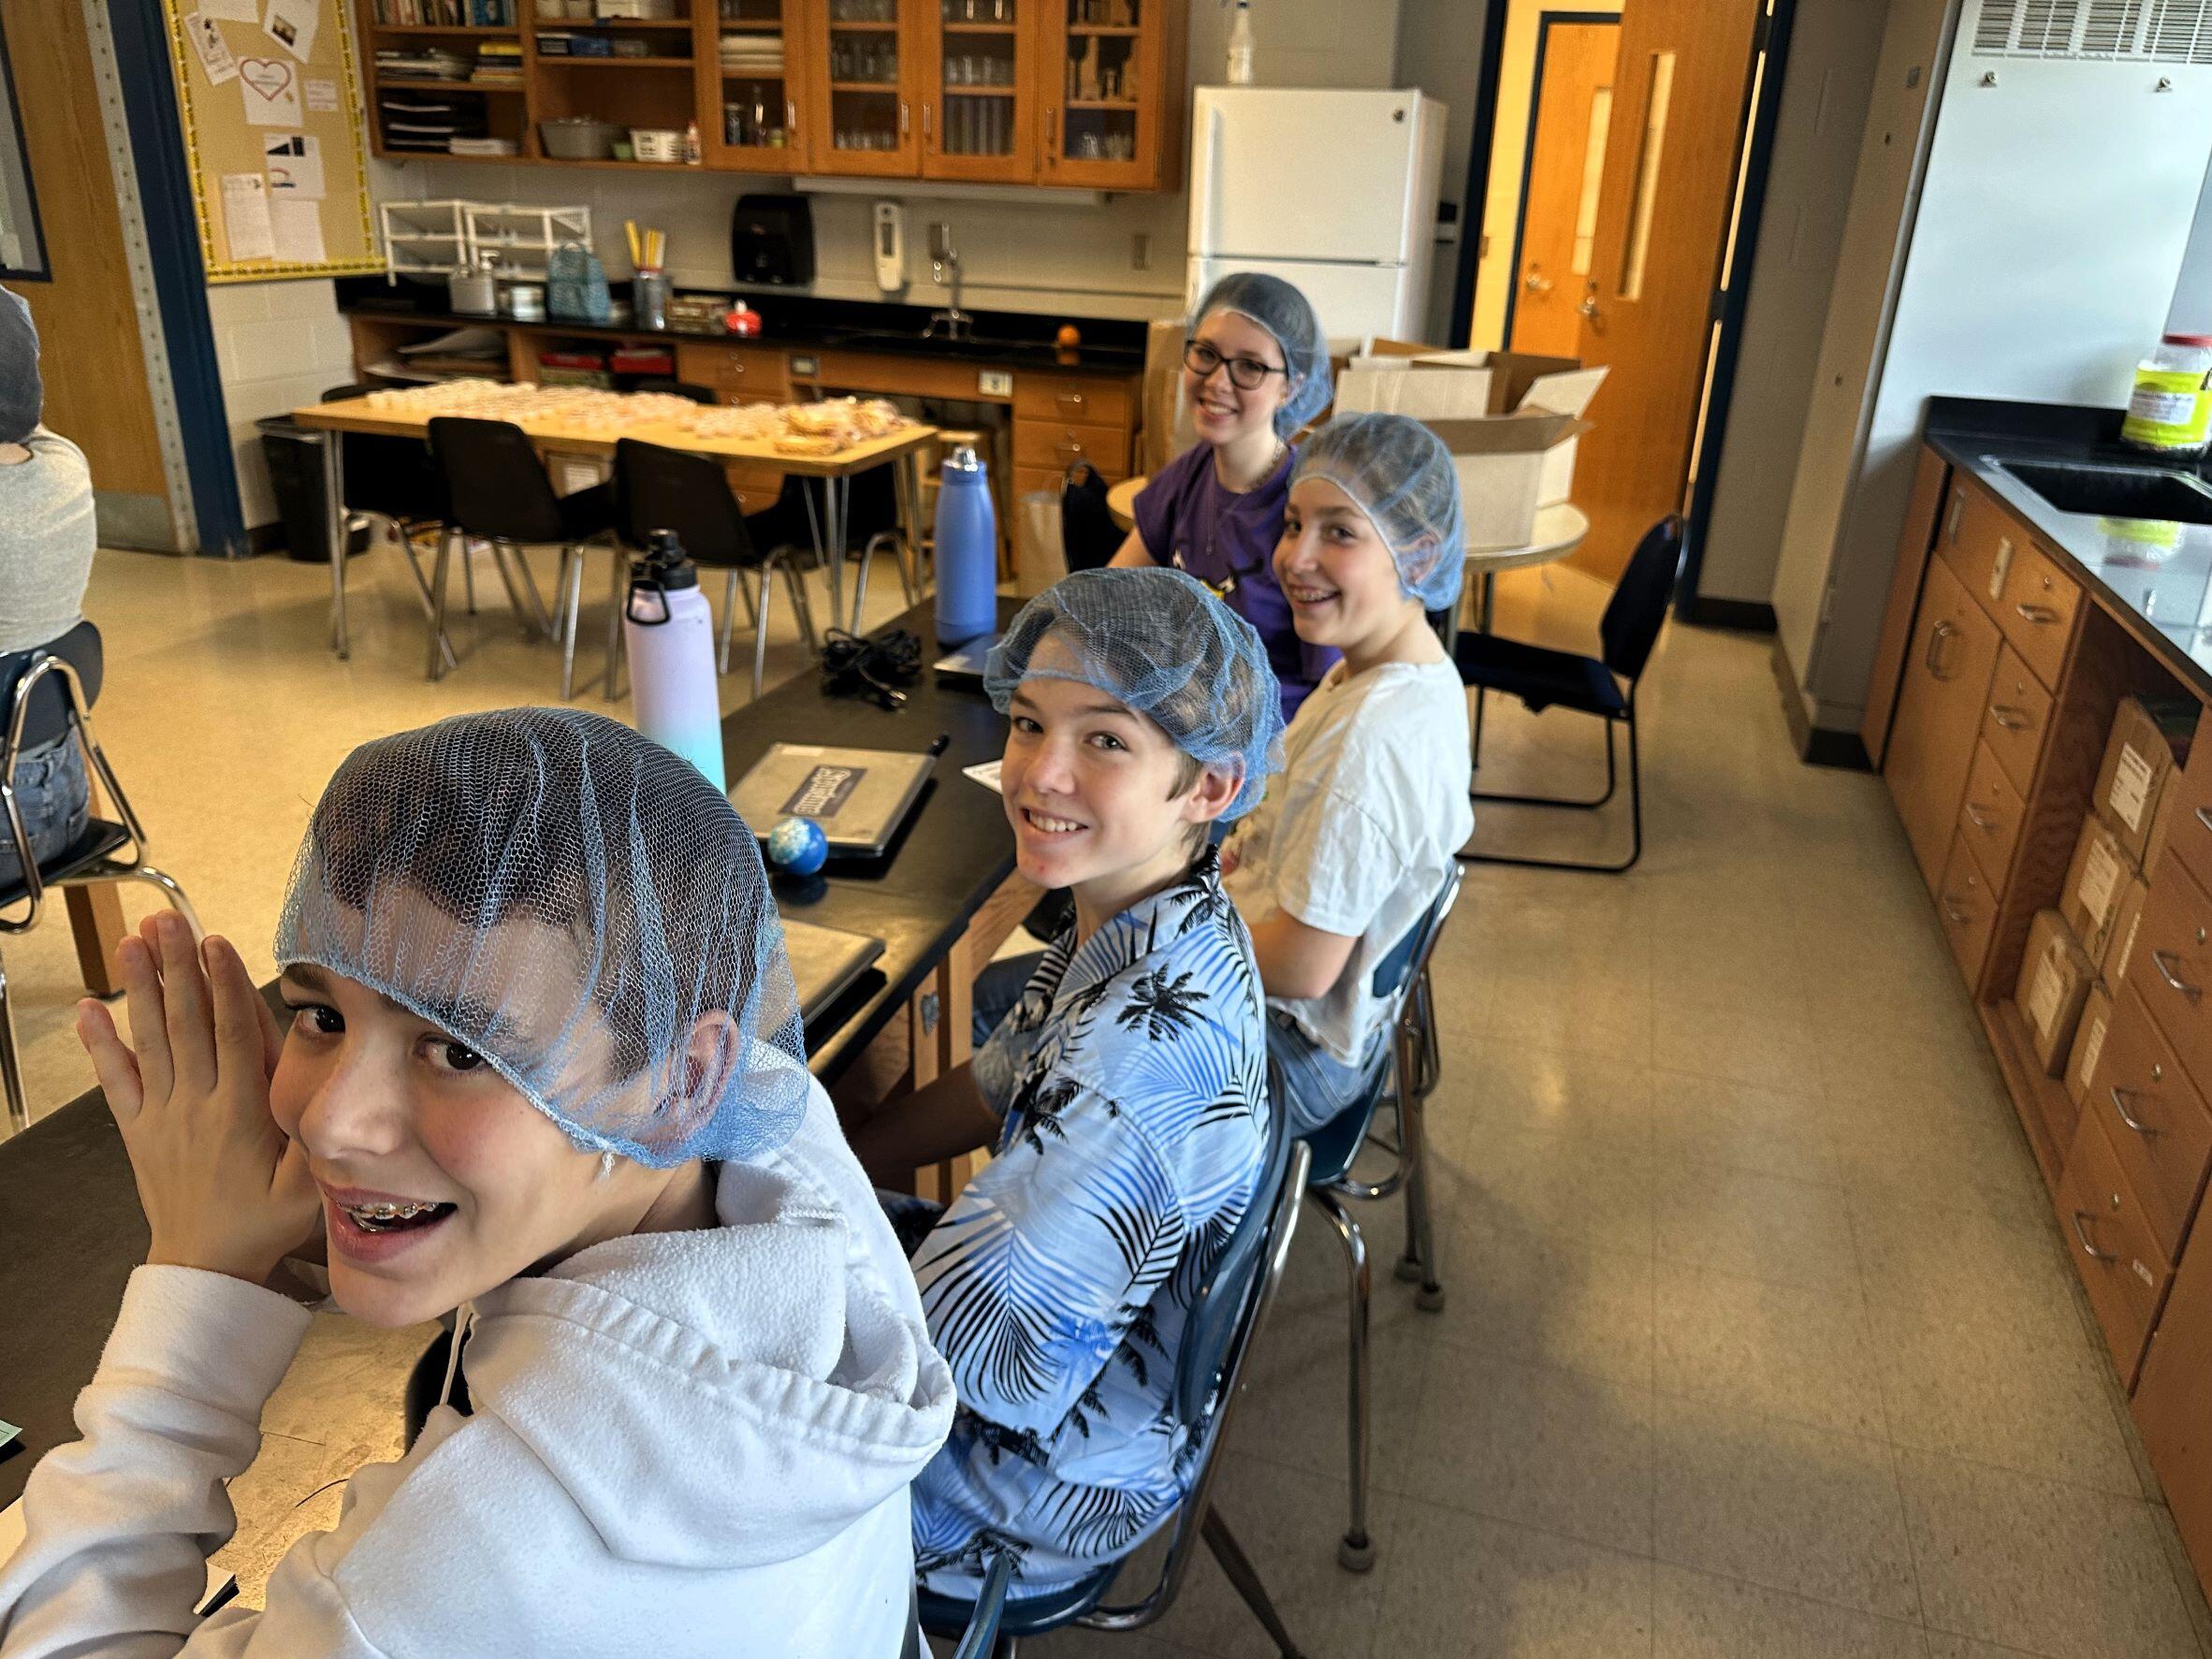 Students wearing hair nets in Science class